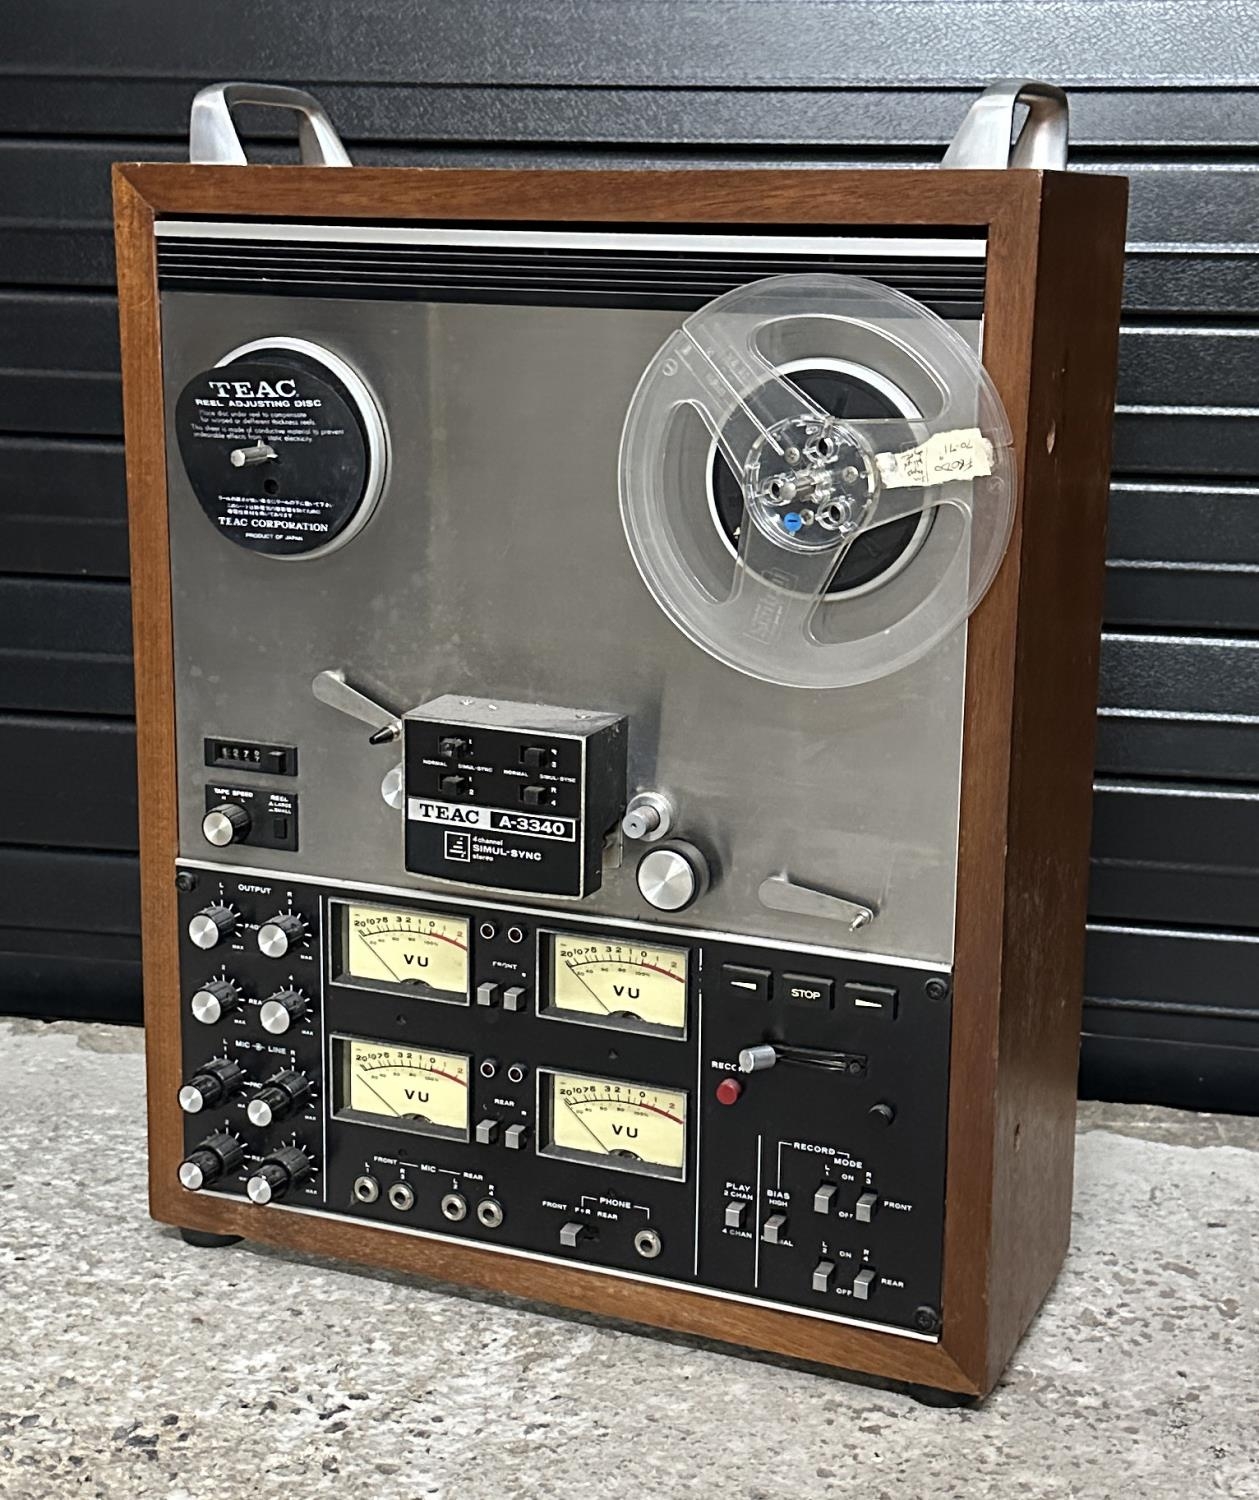 Teac A-3340 reel-to-reel tape recorder*Please note: Gardiner Houlgate do  not guarantee the full work